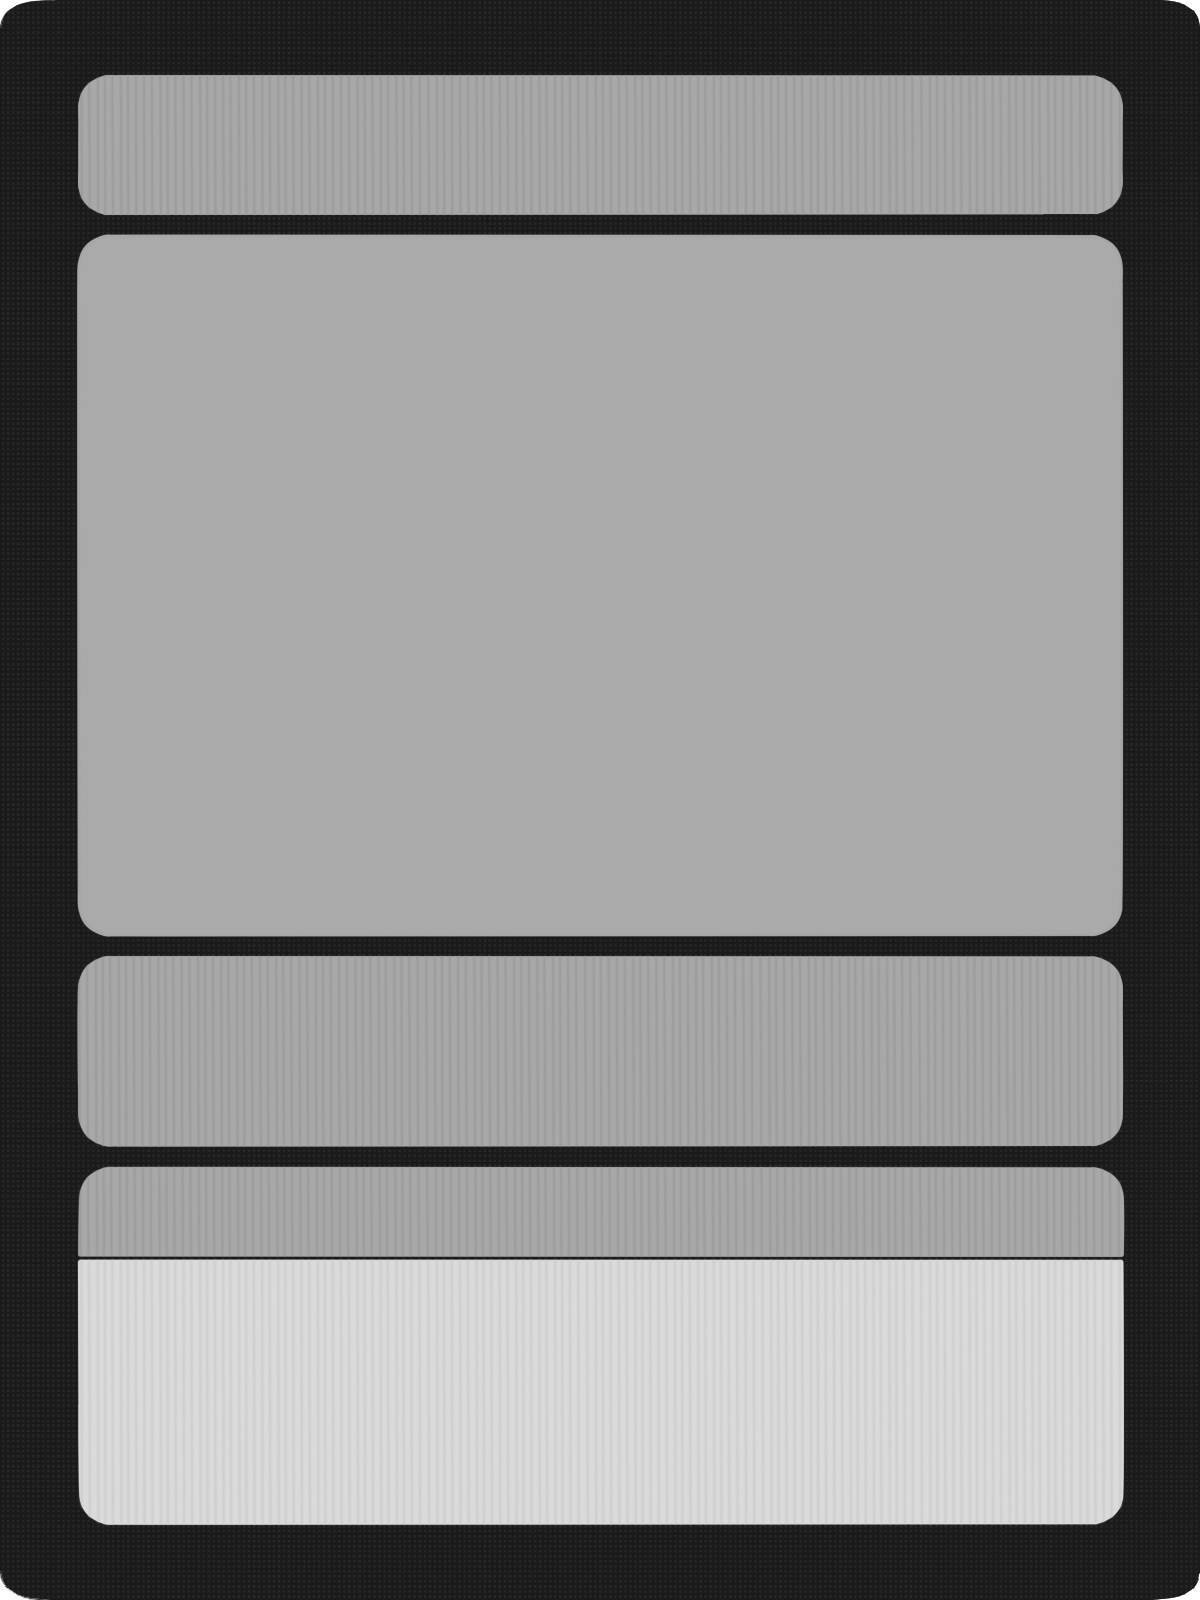 This Is A Free To Use Template For Those Wishing Within Blank Magic Card Template